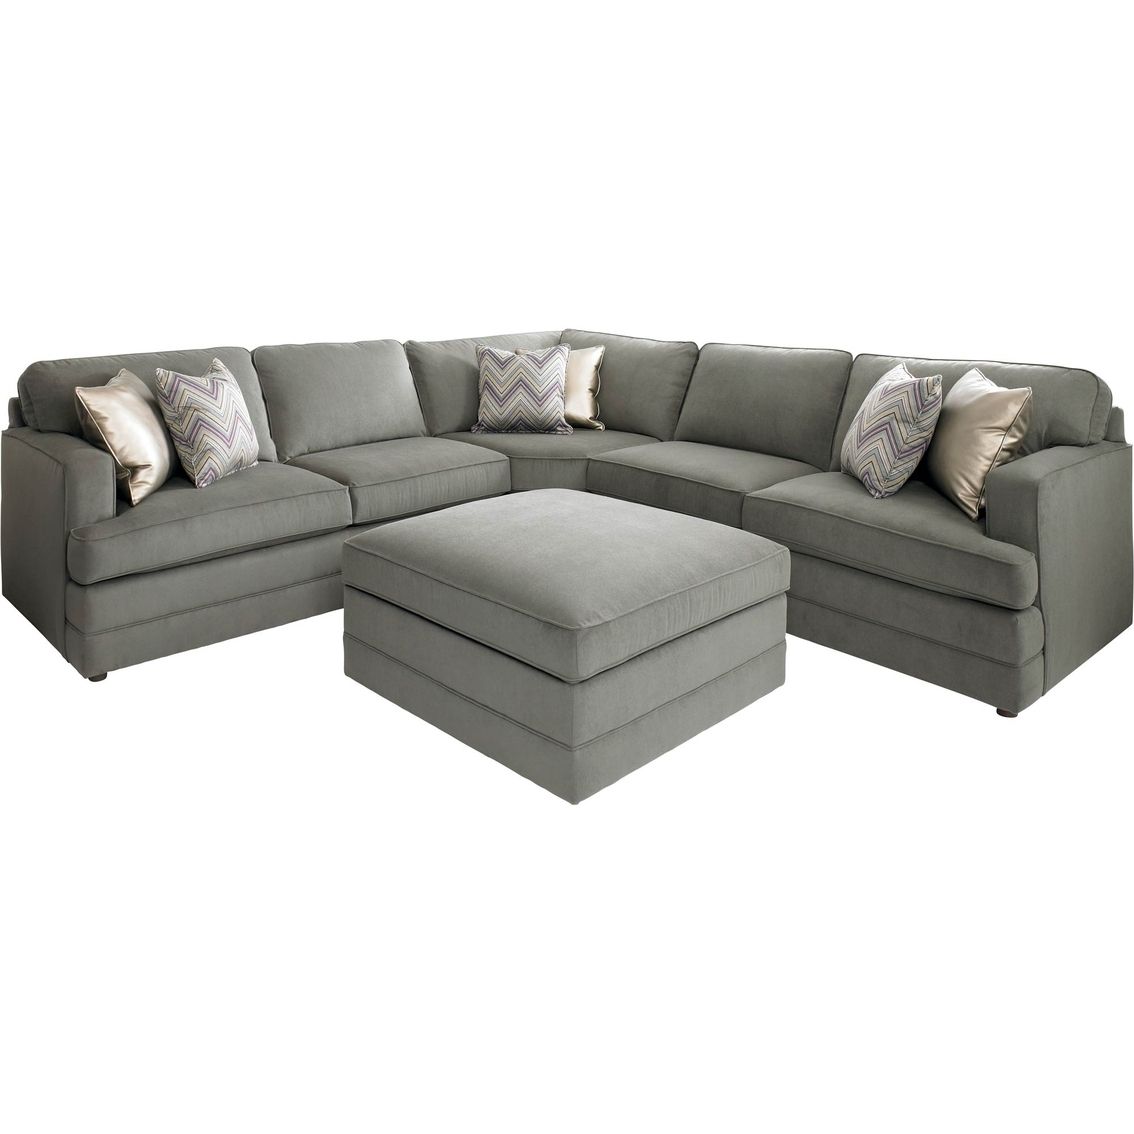 Bassett Dalton L Shaped Sectional Sofa With Ottoman | Making Our With Regard To Sectional Sofas At Bassett (View 7 of 15)